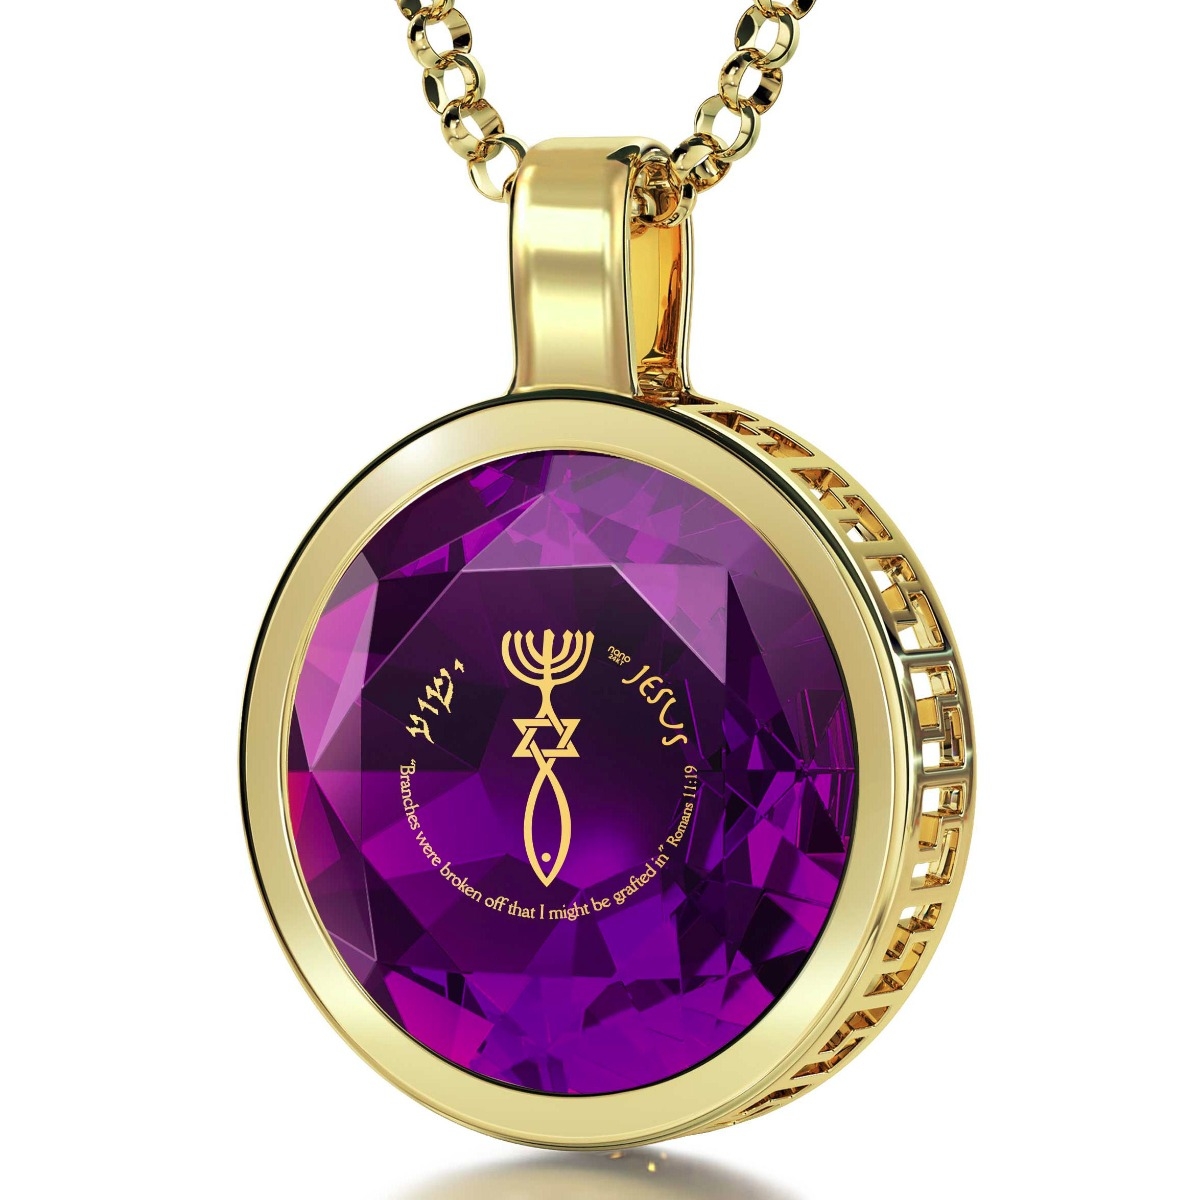 Nano 24K Gold Plated and Gemstone Grafted-In Necklace with 24K Gold Micro-Inscription - 1